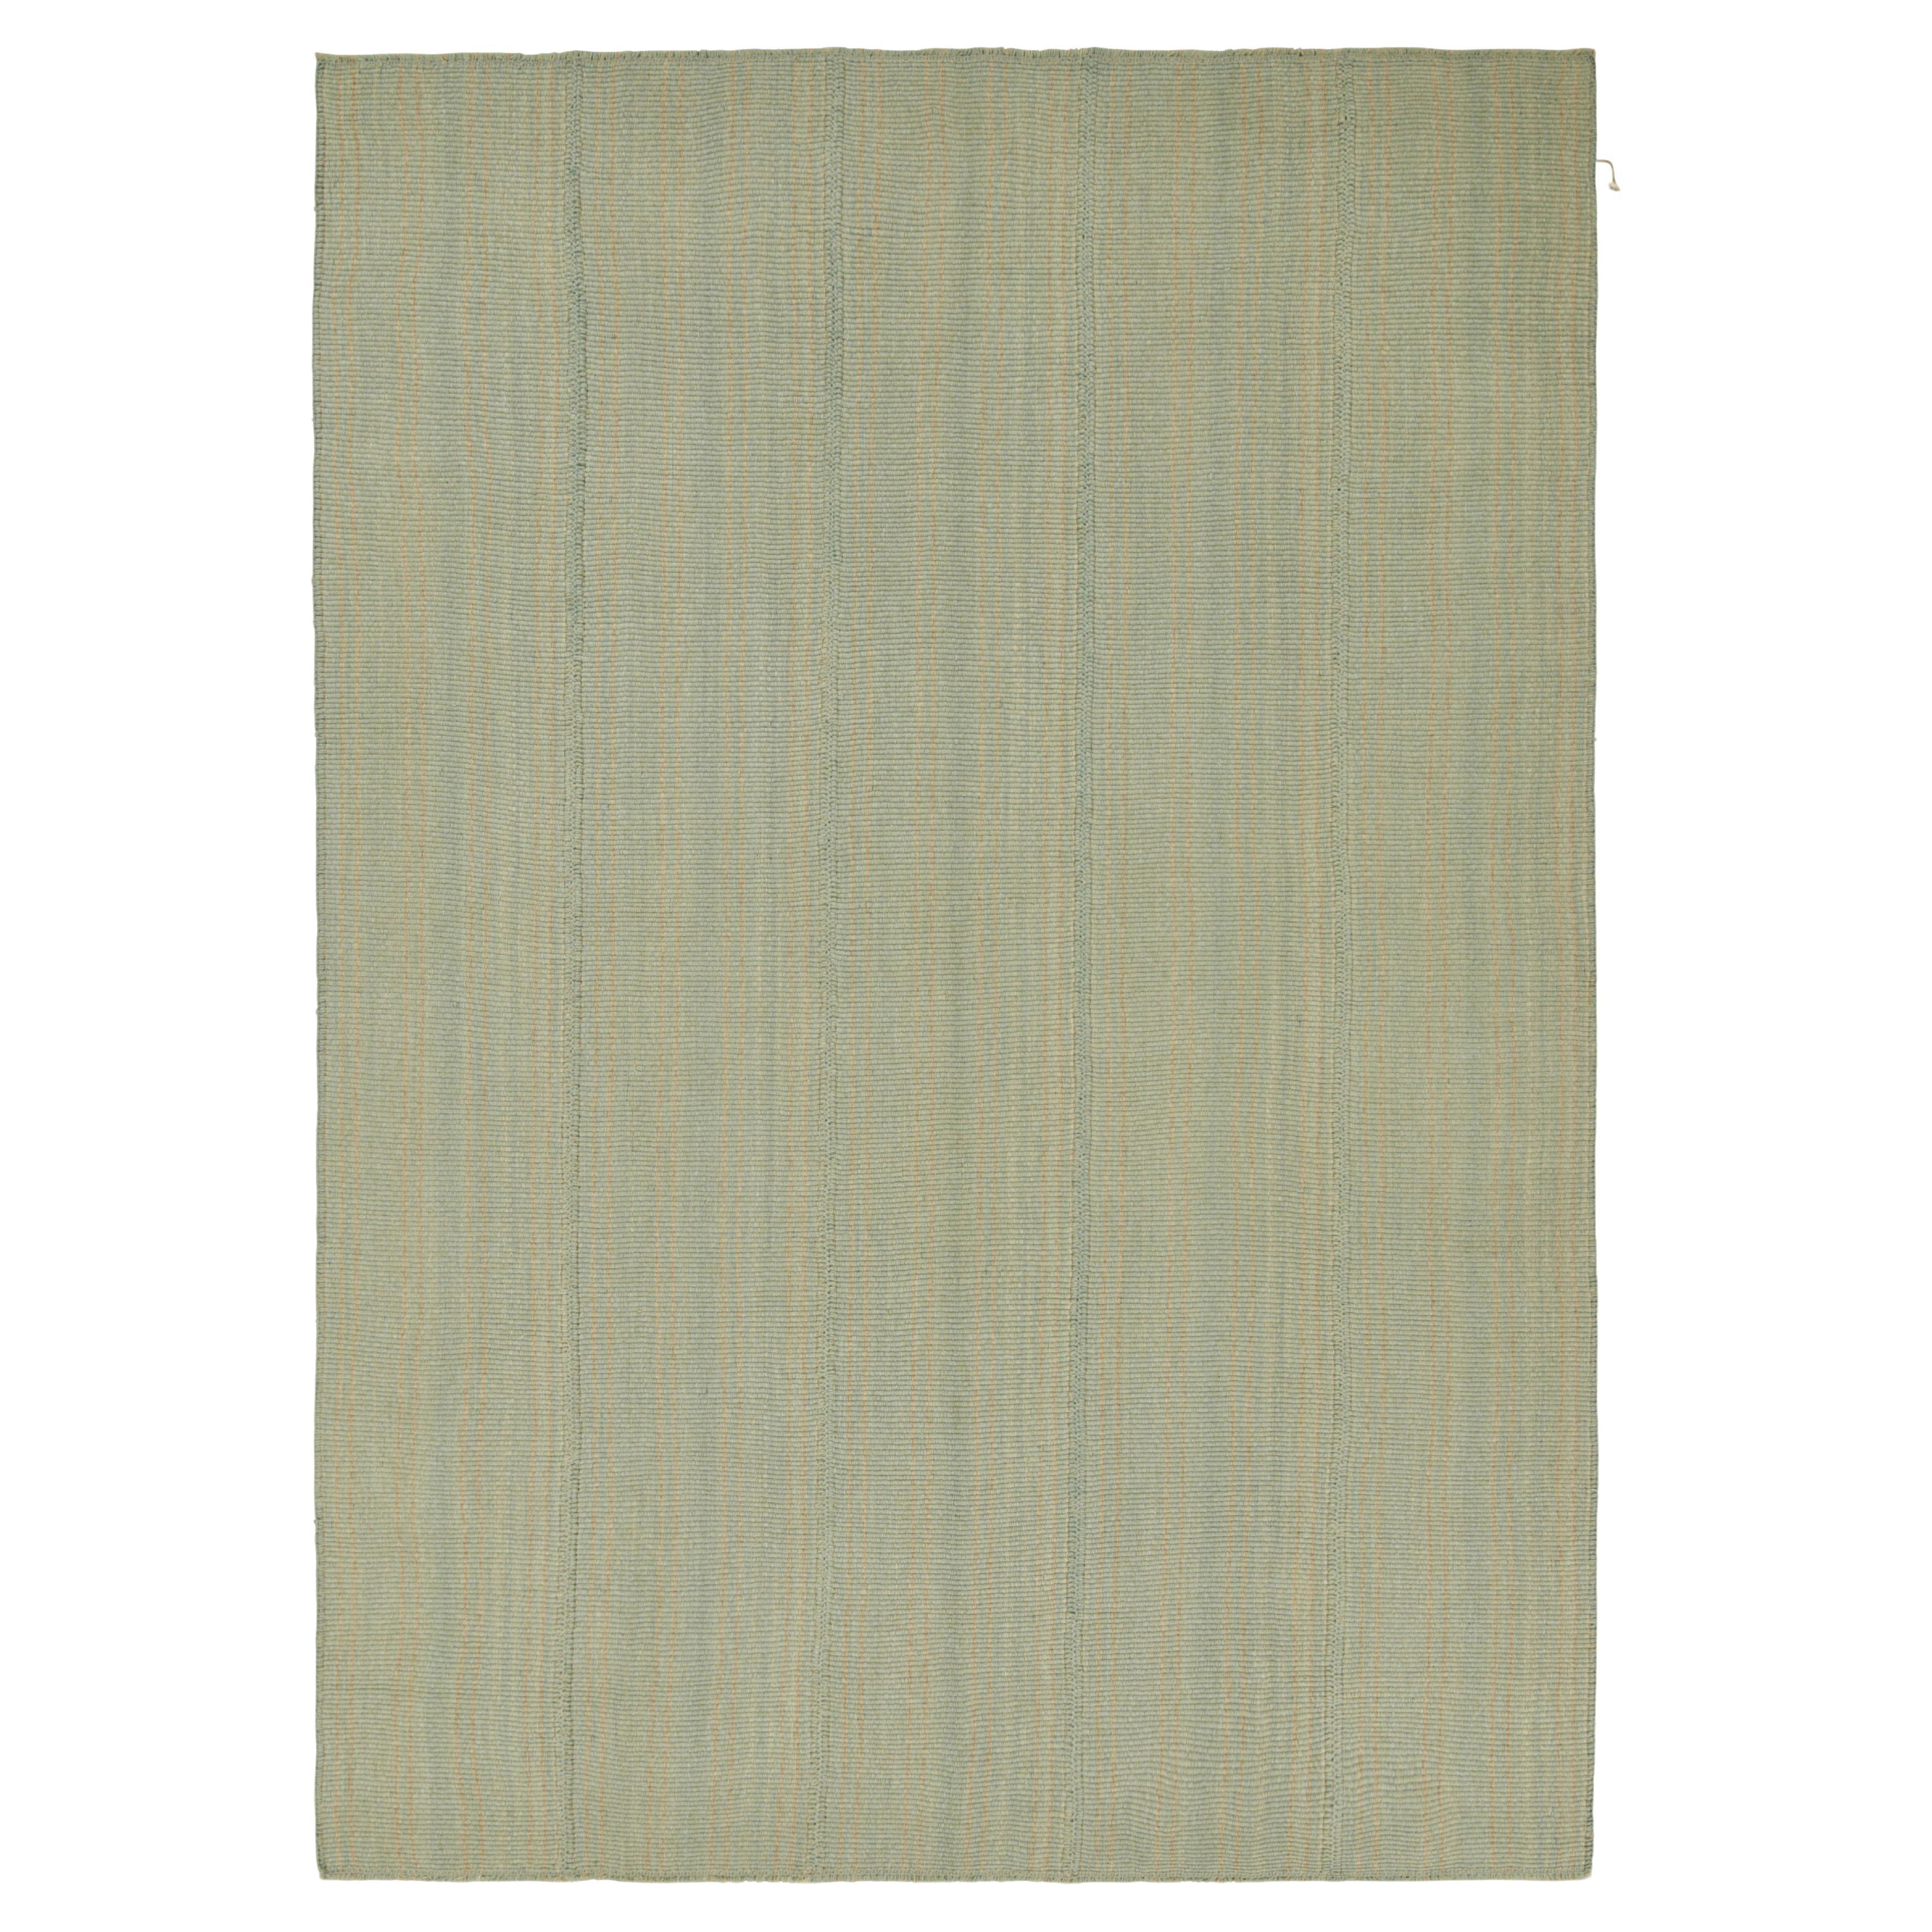 Rug & Kilim’s Contemporary Kilim in Blue and Beige Textural Stripes